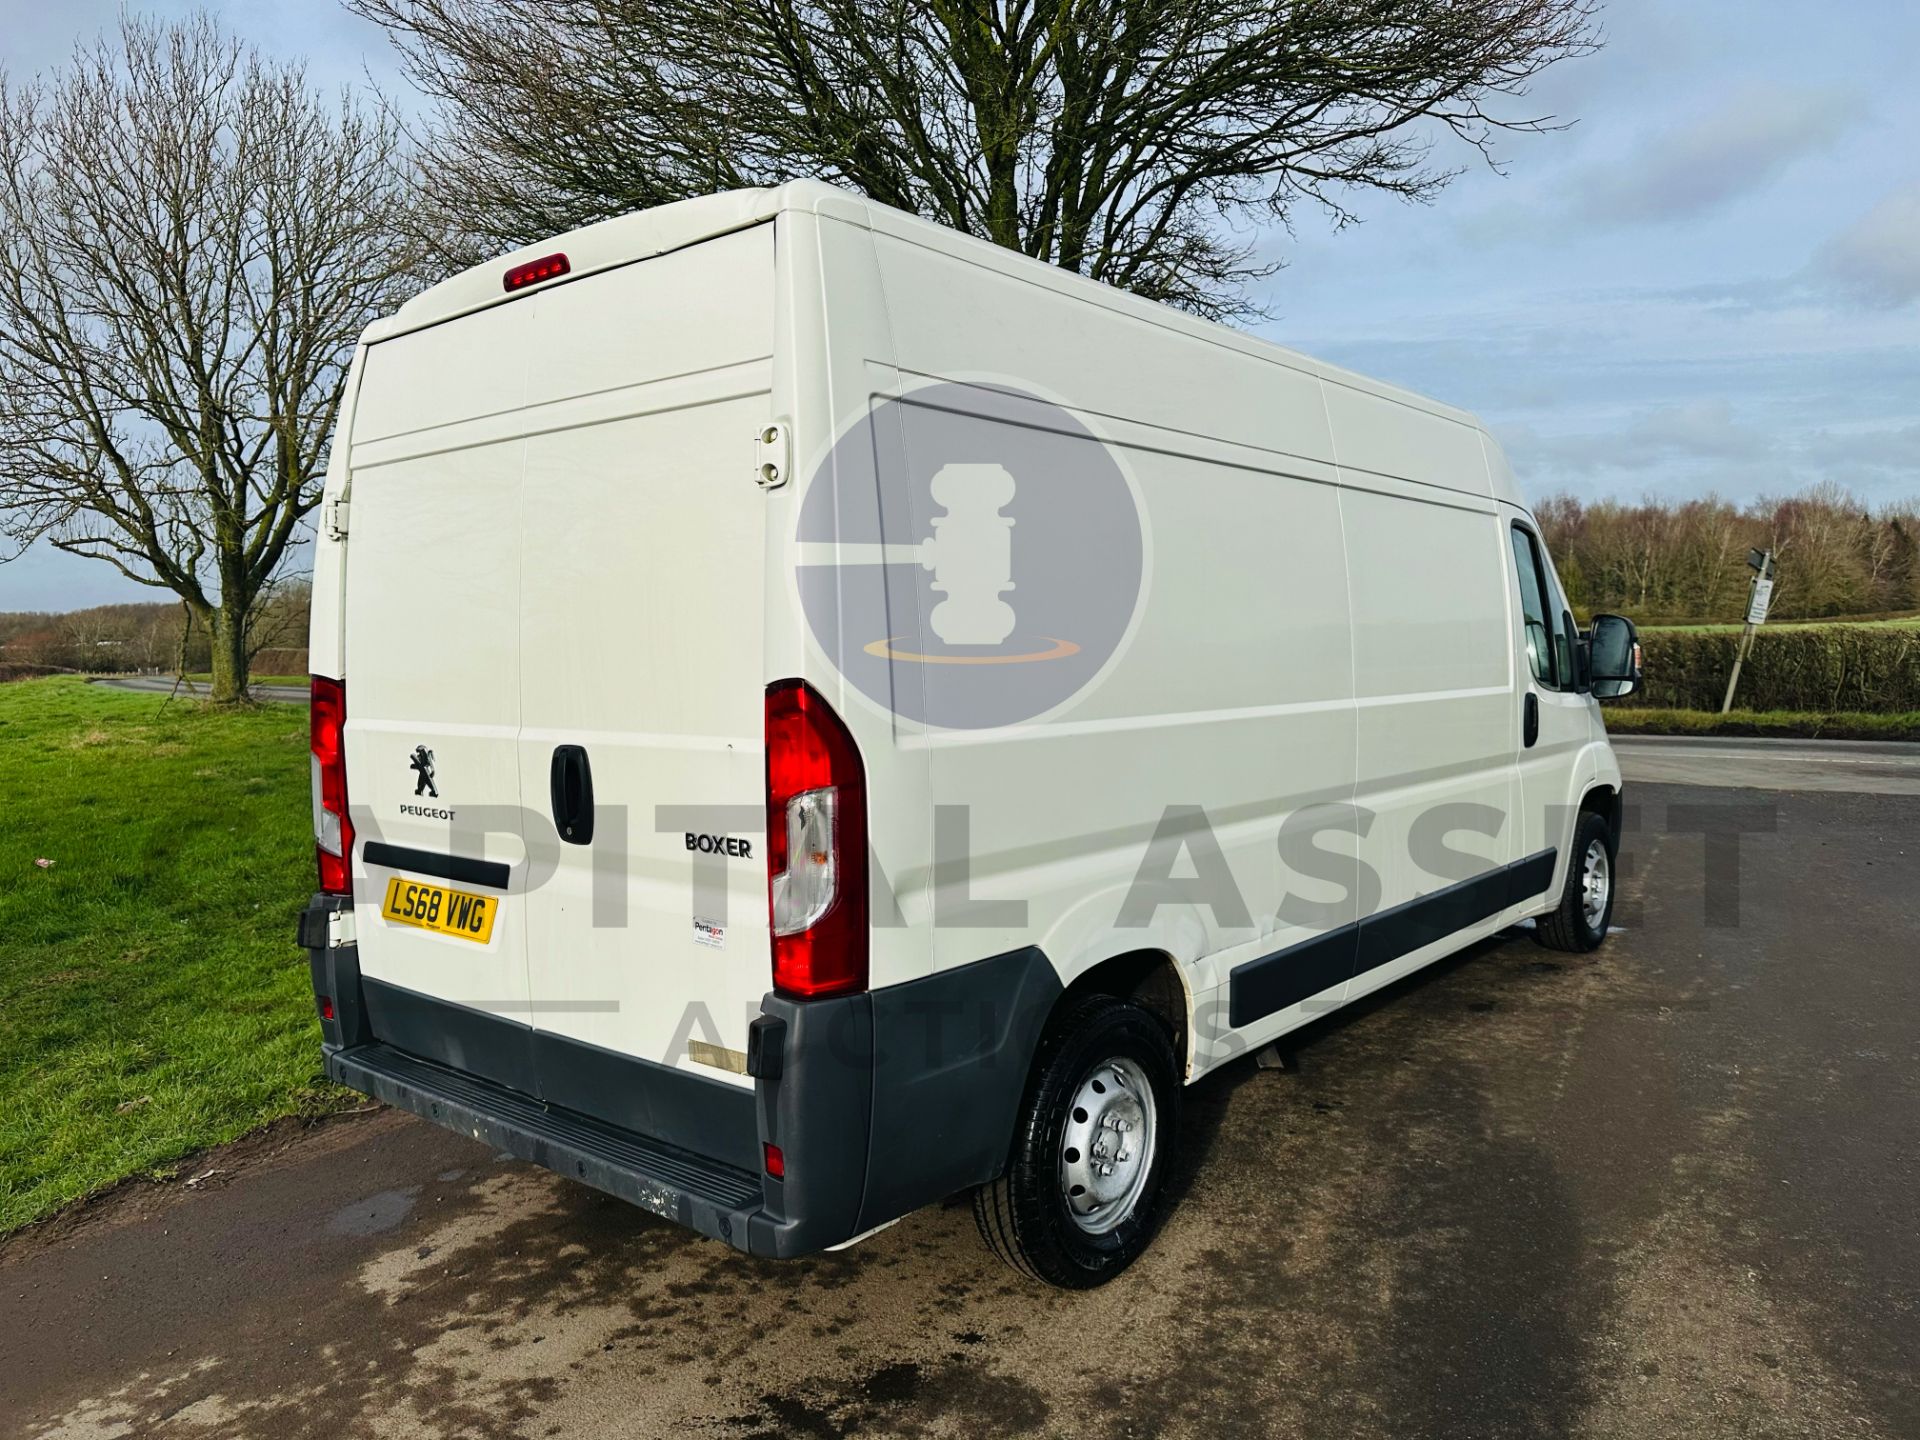 PEUGEOT BOXER *PROFESSIONAL* LWB HI-ROOF (2019 - EURO 6) 2.2 BLUE HDI - 6 SPEED *A/C* (1 OWNER) - Image 8 of 28